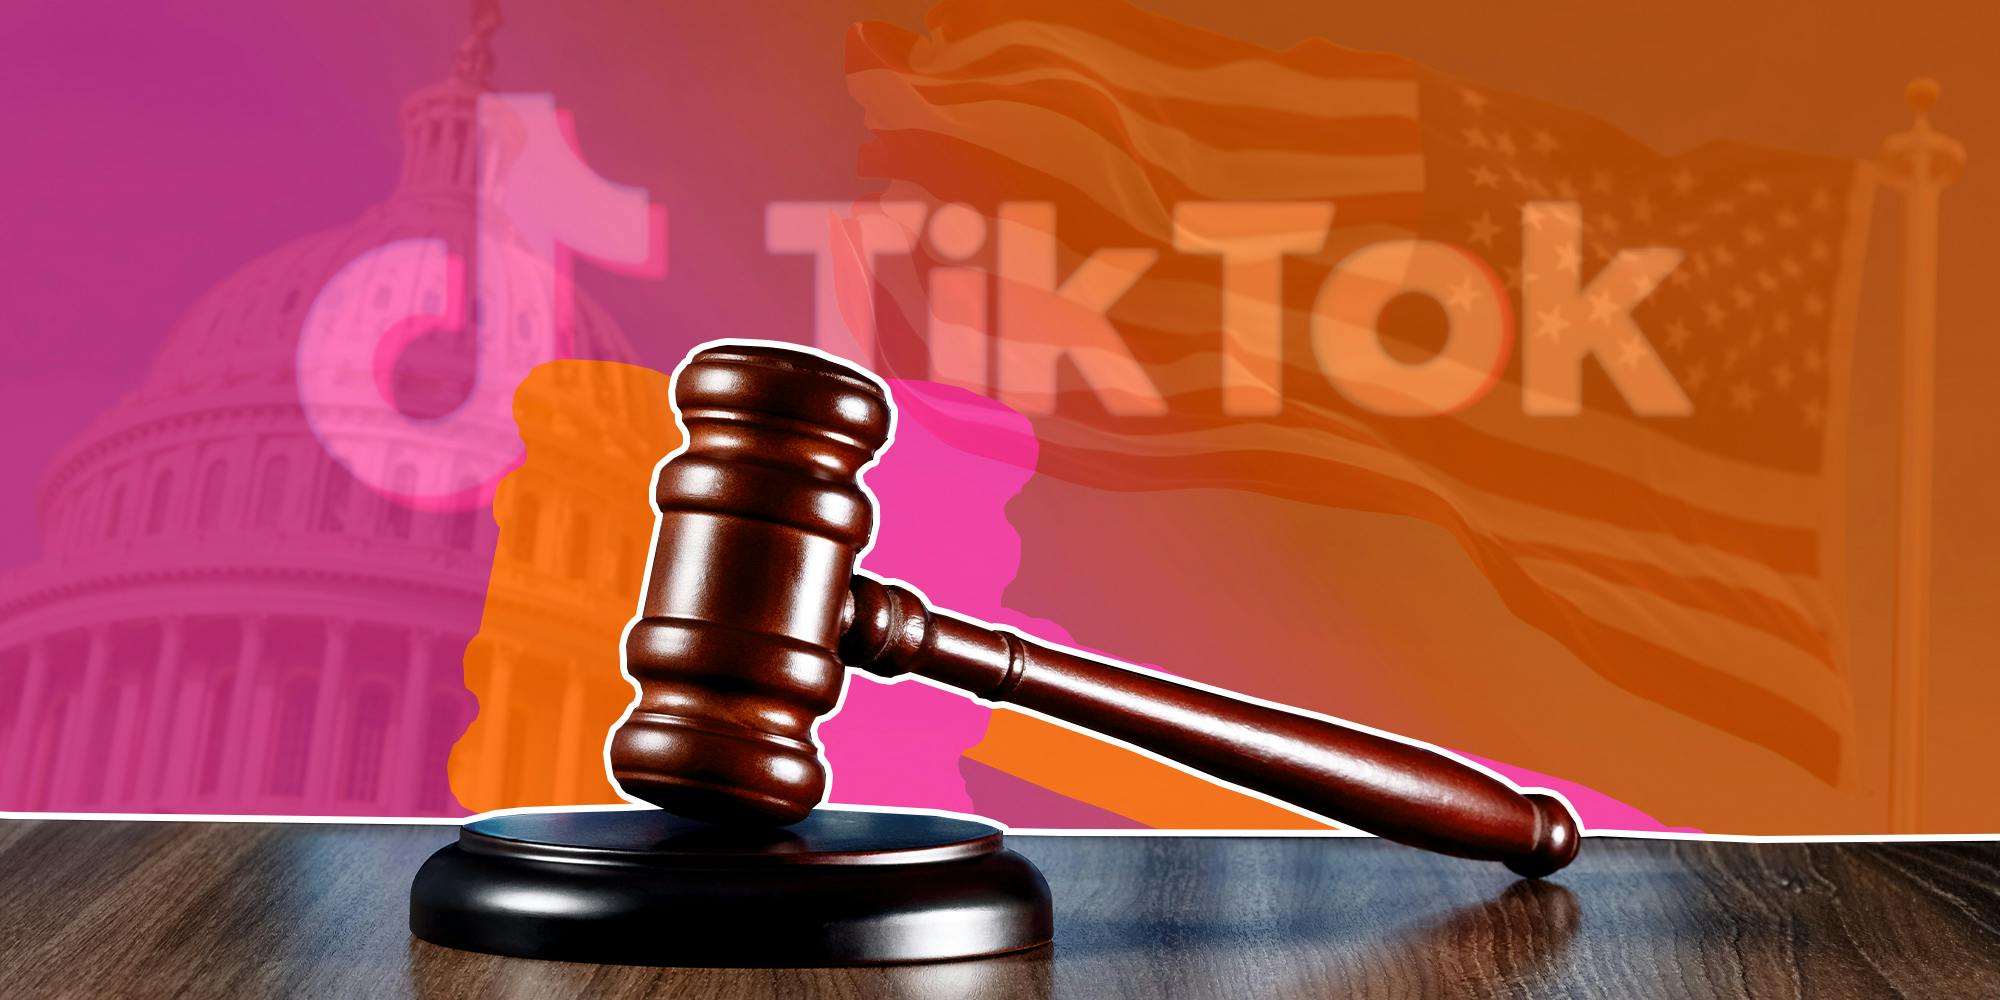 TikTok Ban-or-Sell Bill Is Now Bundled With Military Aid